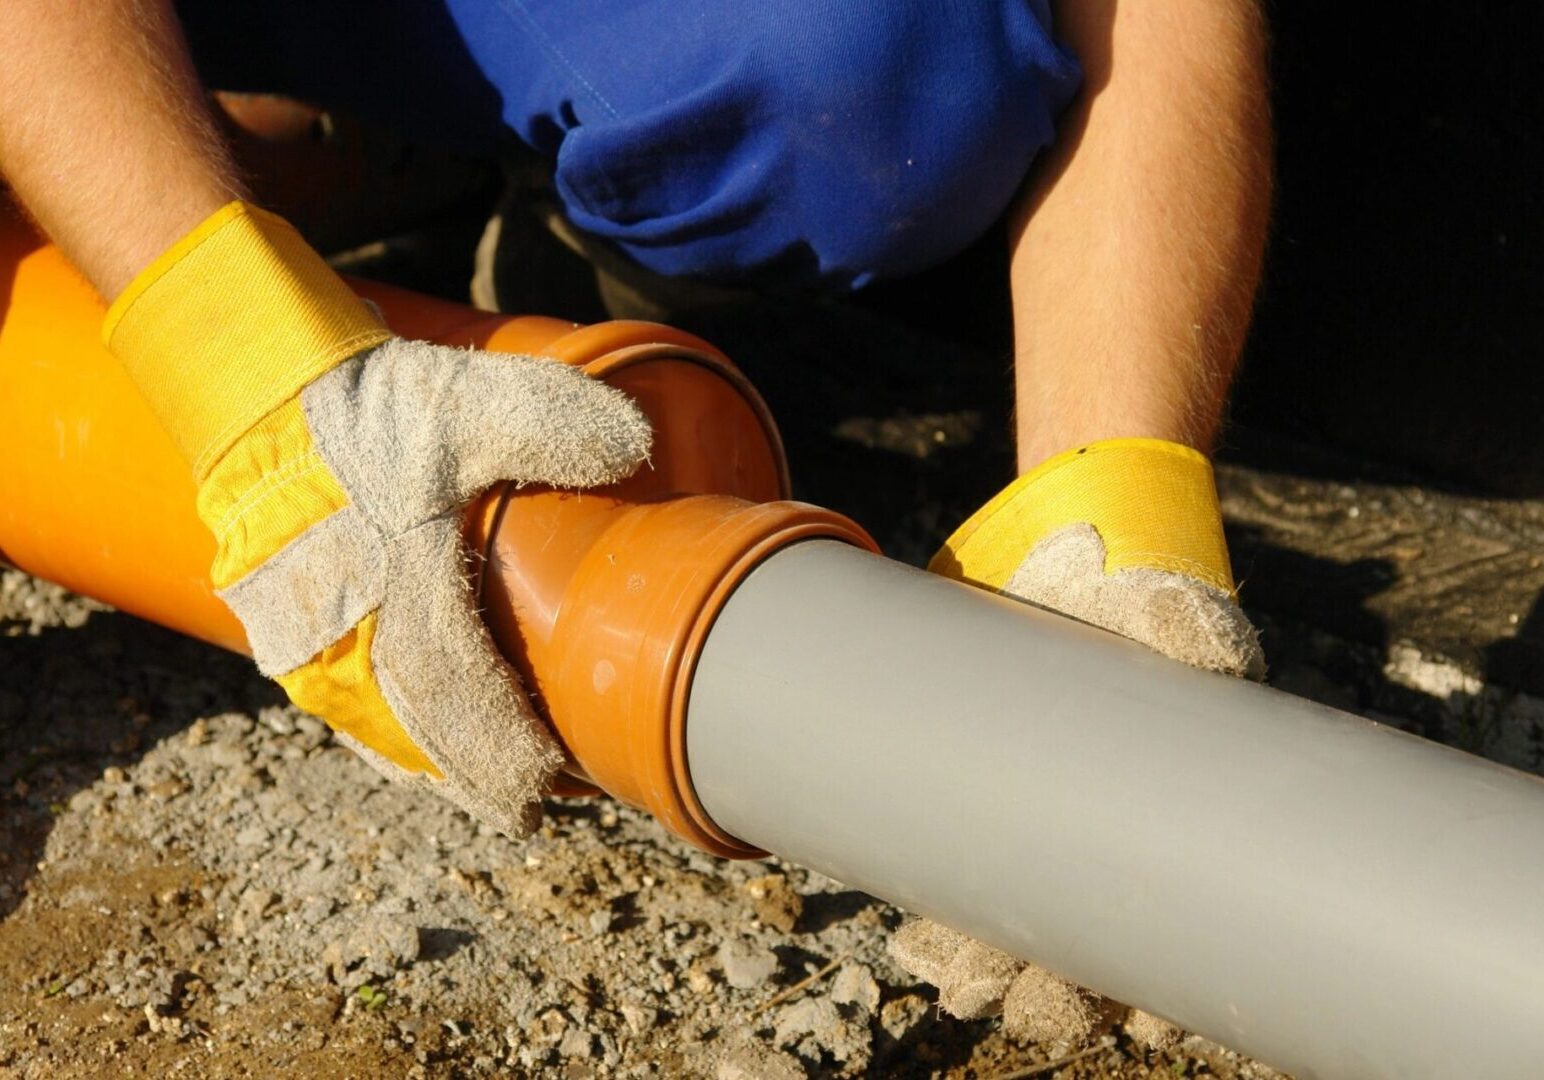 A worker working on a site on the ground